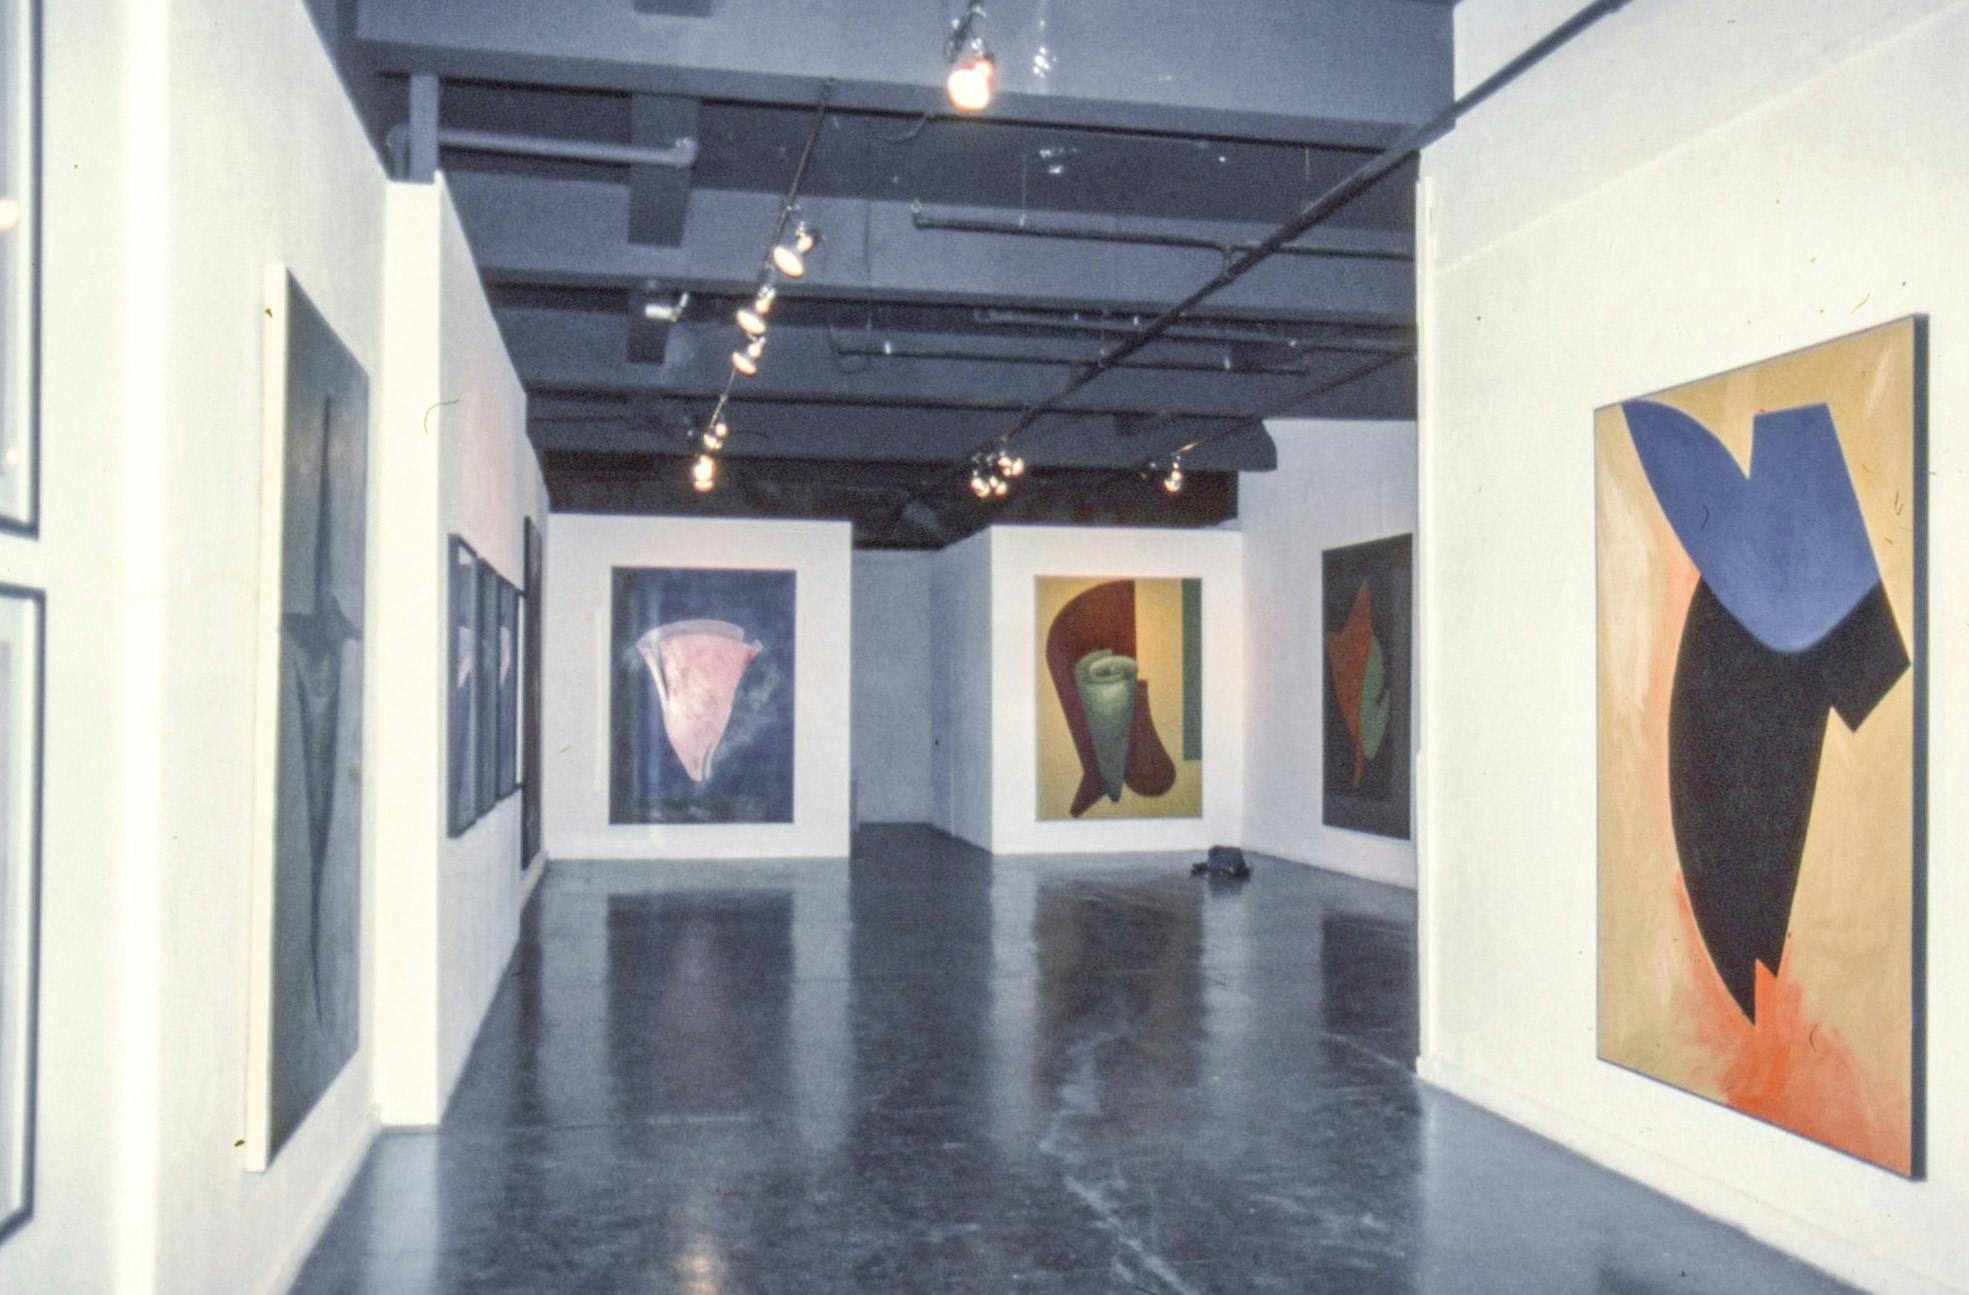 Several paintings and drawings on the walls of a gallery. The paintings are all quite large and colourful, and the drawings are smaller and black. All the works are of abstract forms.